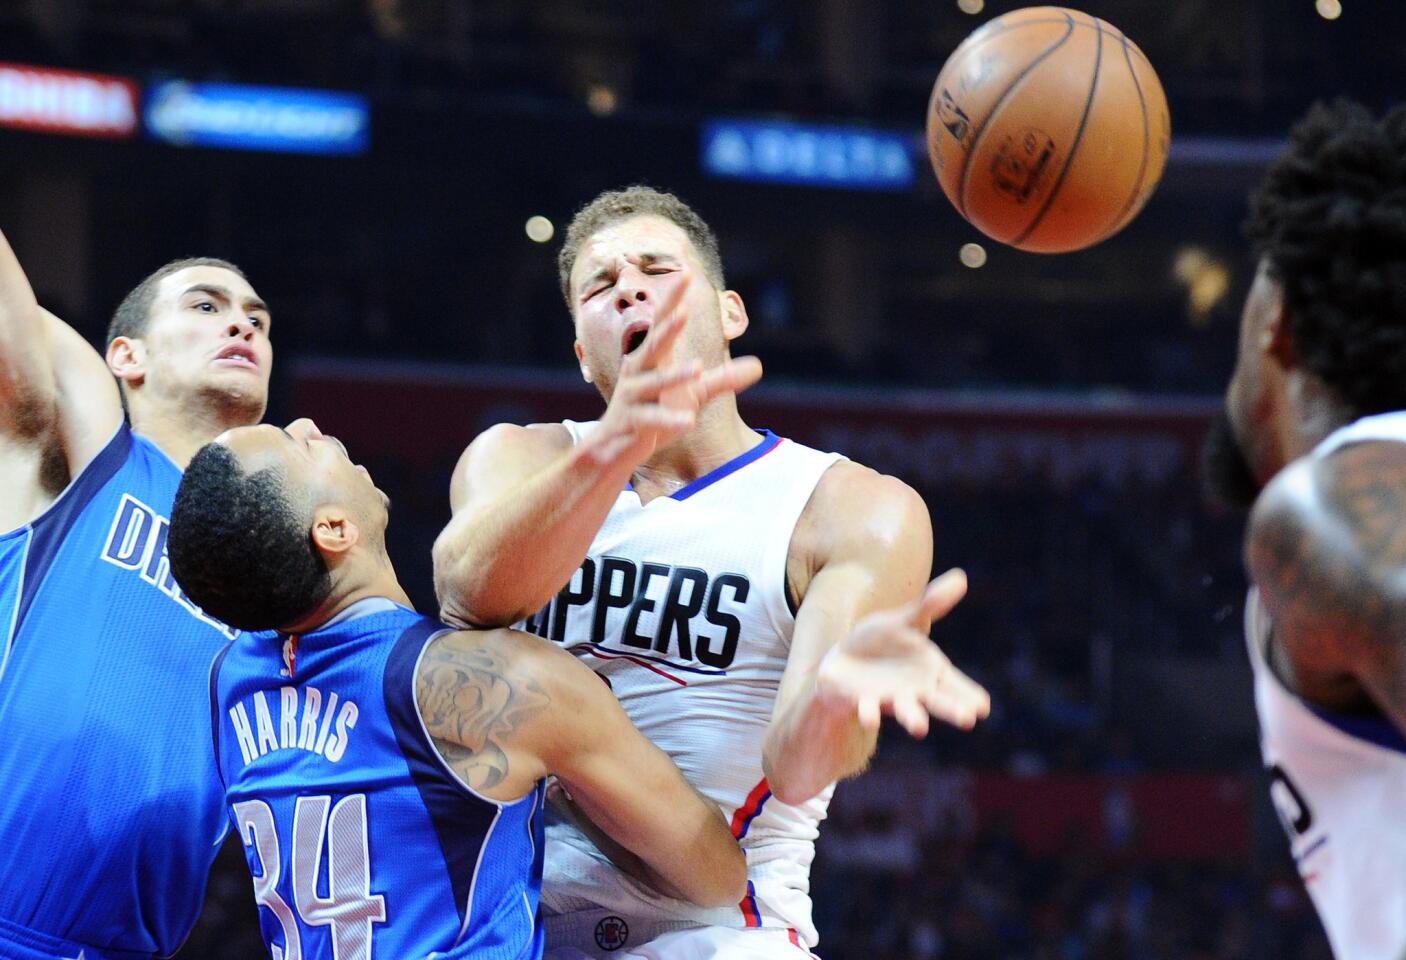 Clippers forward Blake Griffin is called for charging into Mavericks guard Devin Harris in the first half Thursday night at Staples Center.